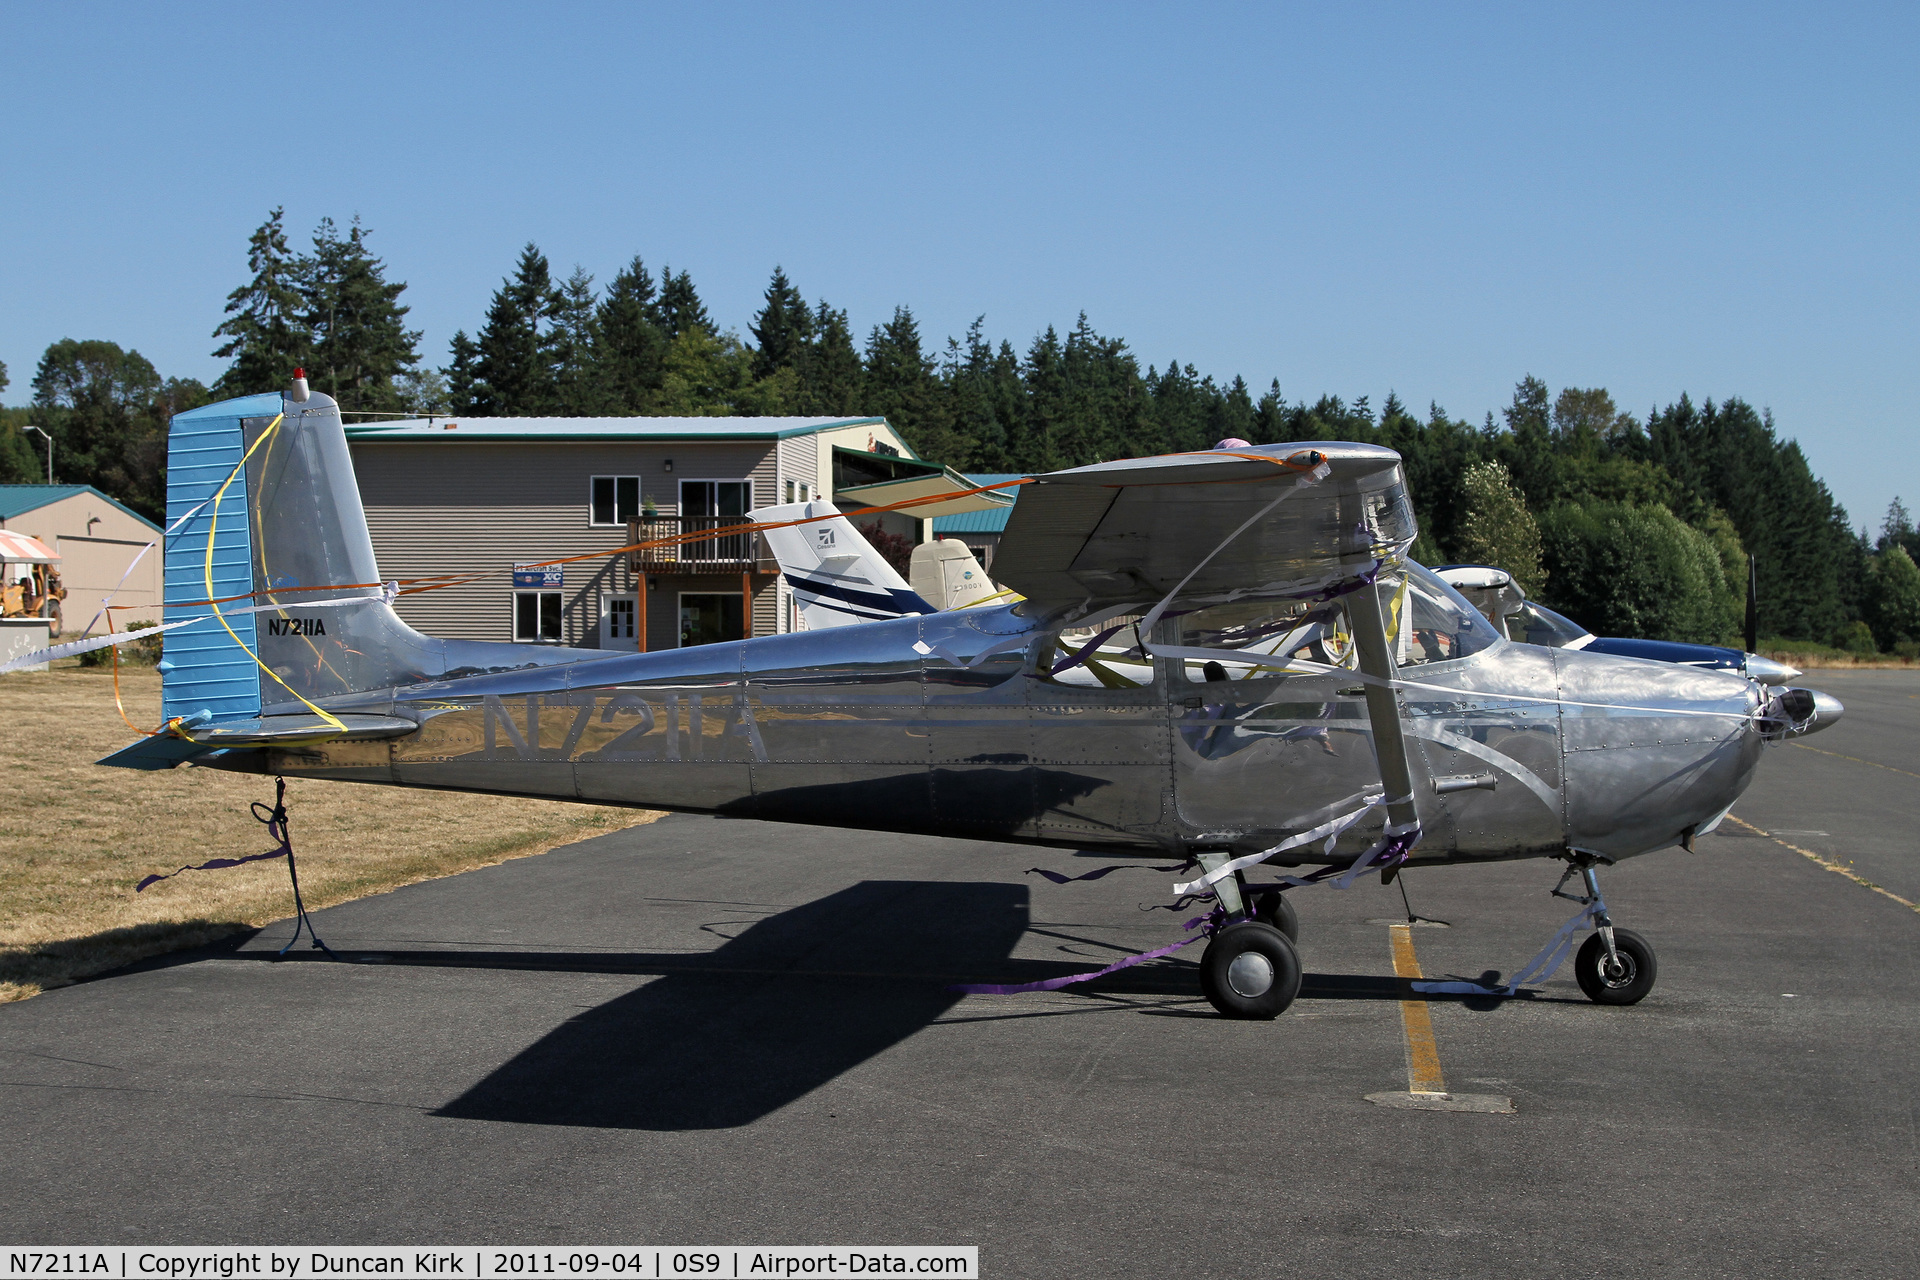 N7211A, 1956 Cessna 172 C/N 29311, A wedding had recently taken place and the aircraft had been duly decorated!